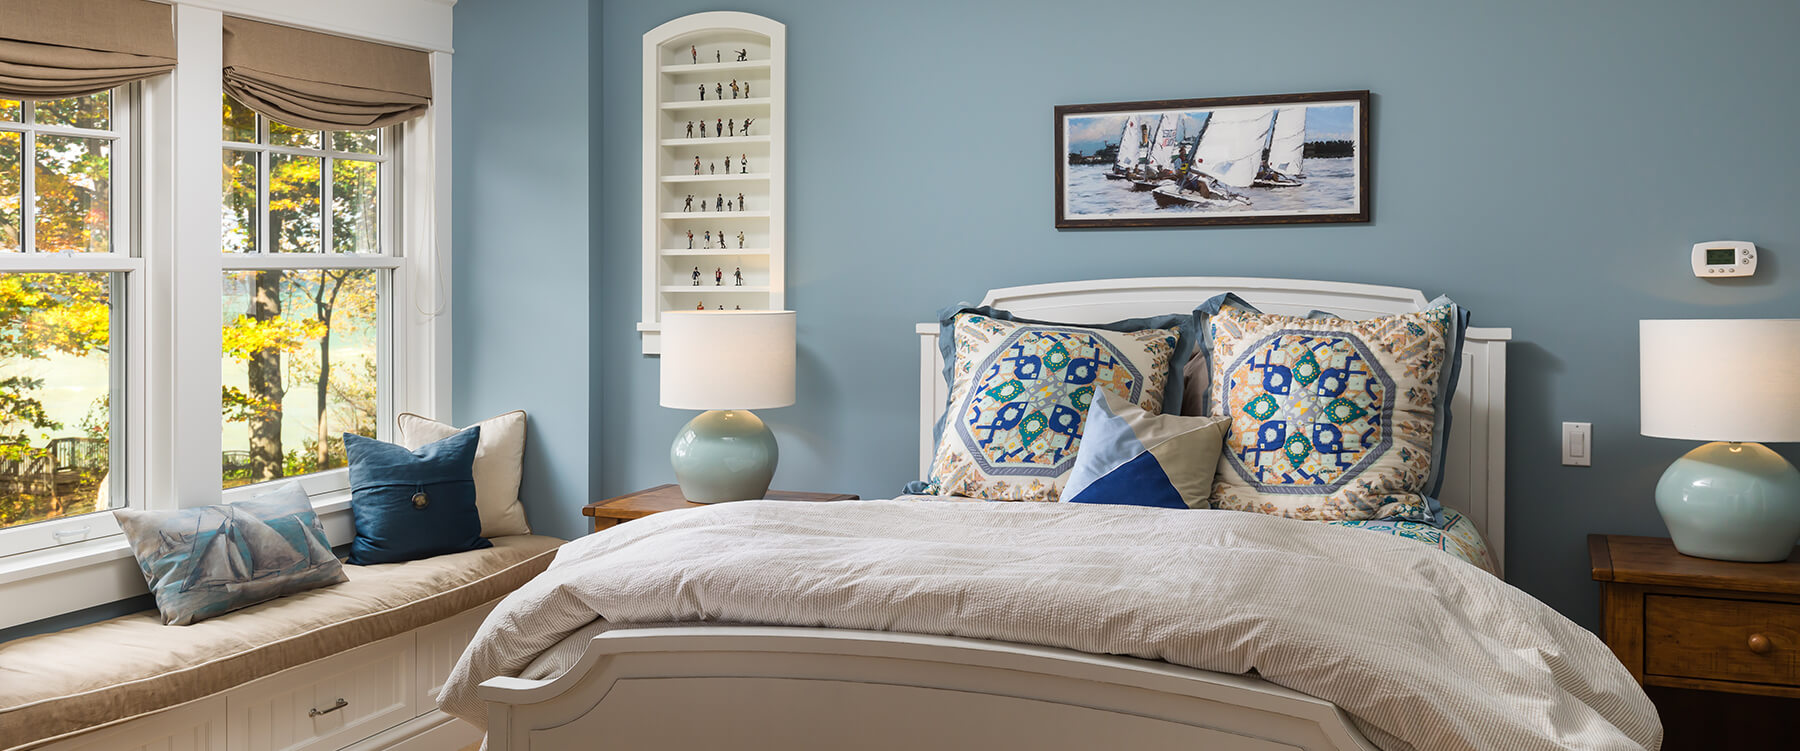 bedroom at shingle style cottage